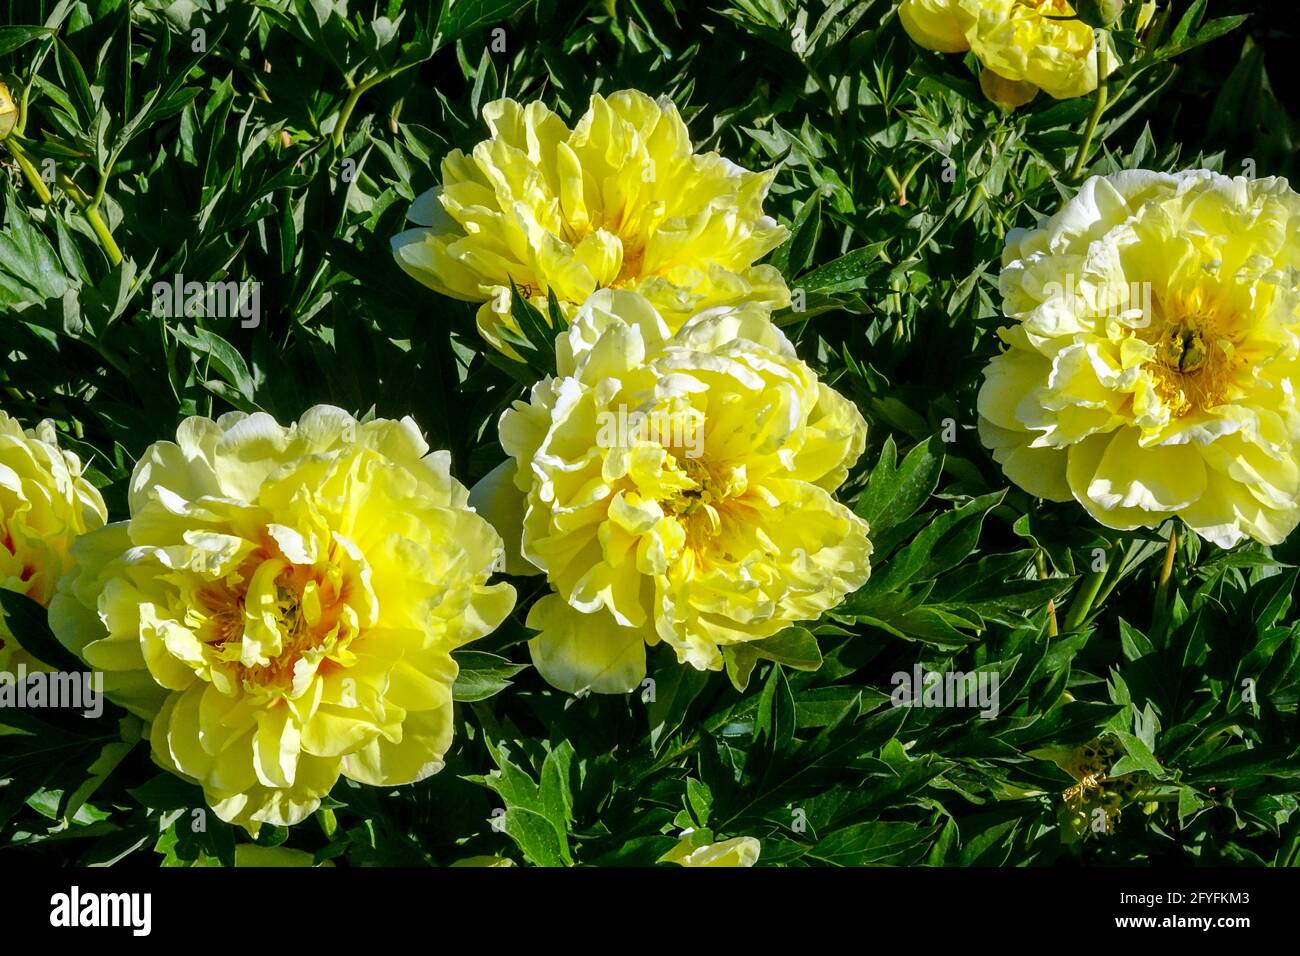 Peony Bartzella Paeonia large, scented, semi-double to double, lemon-yellow flowers hybrid between a tree peony herbaceous peony flower blooms peonies Stock Photo